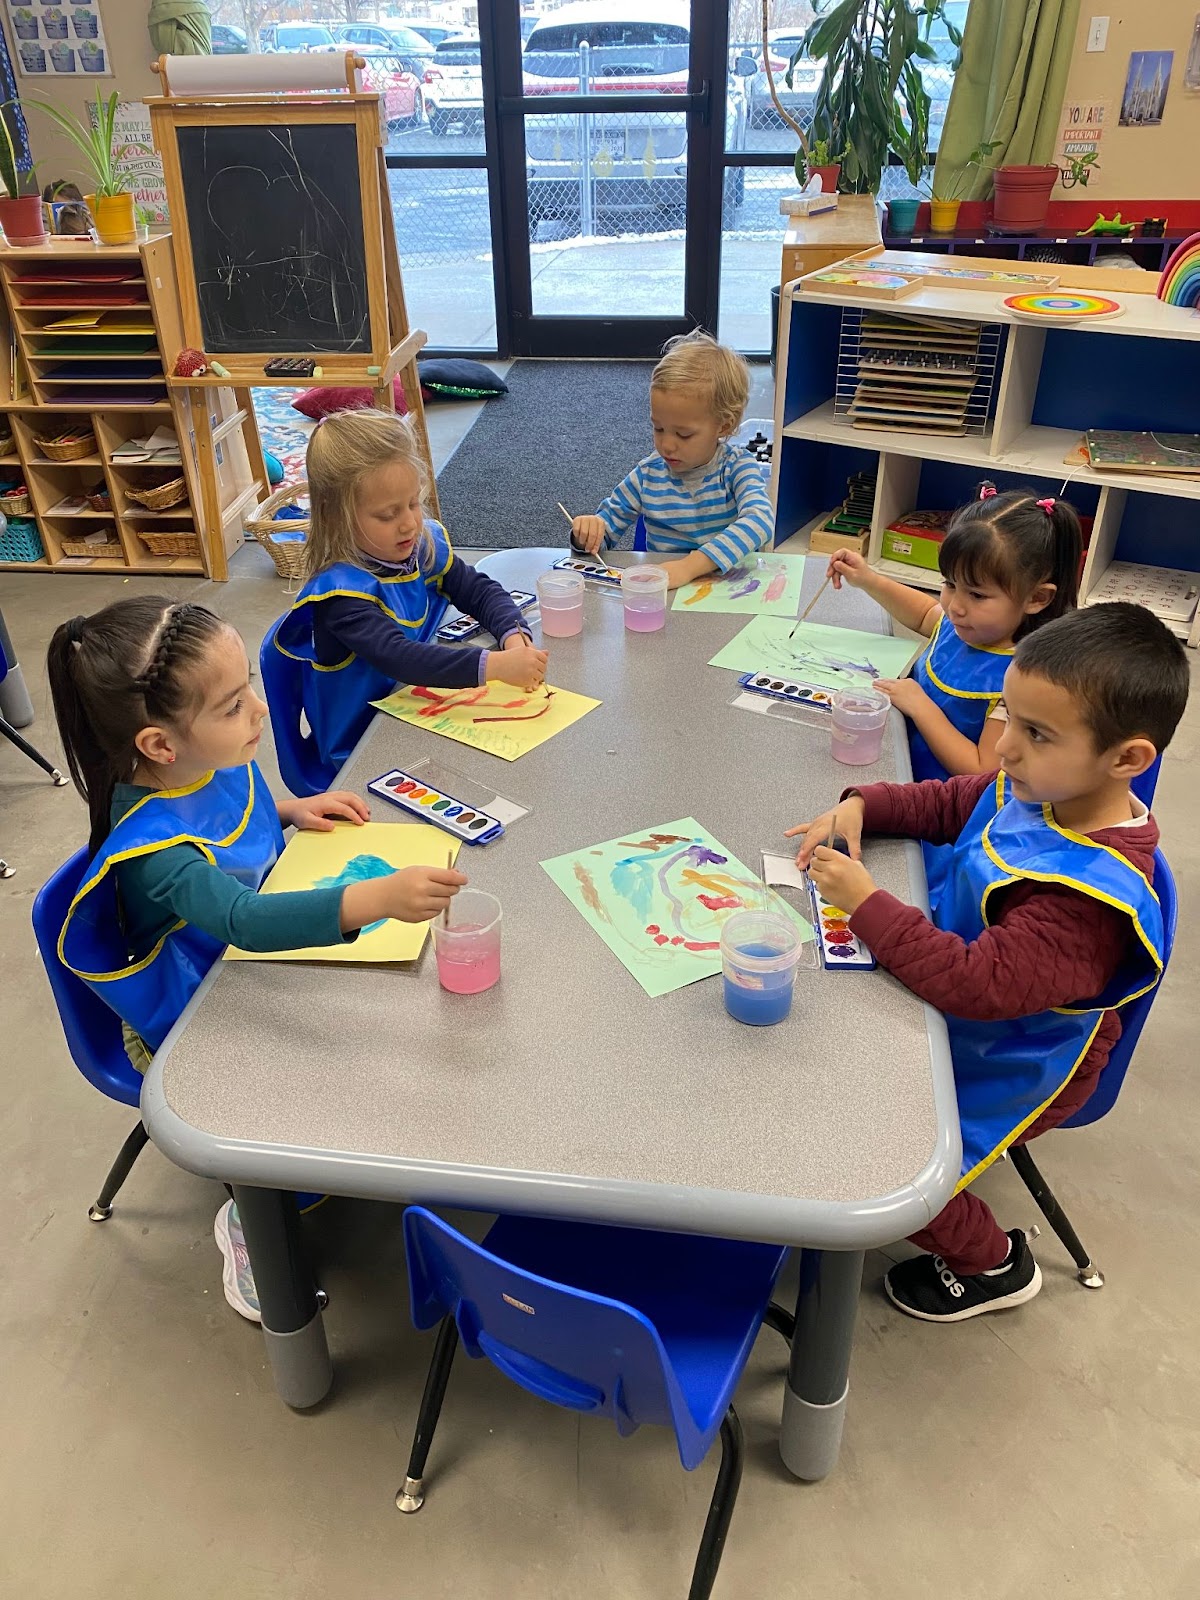 A group of five preschoolers in blue paint smocks sit around a table while watercolor painting